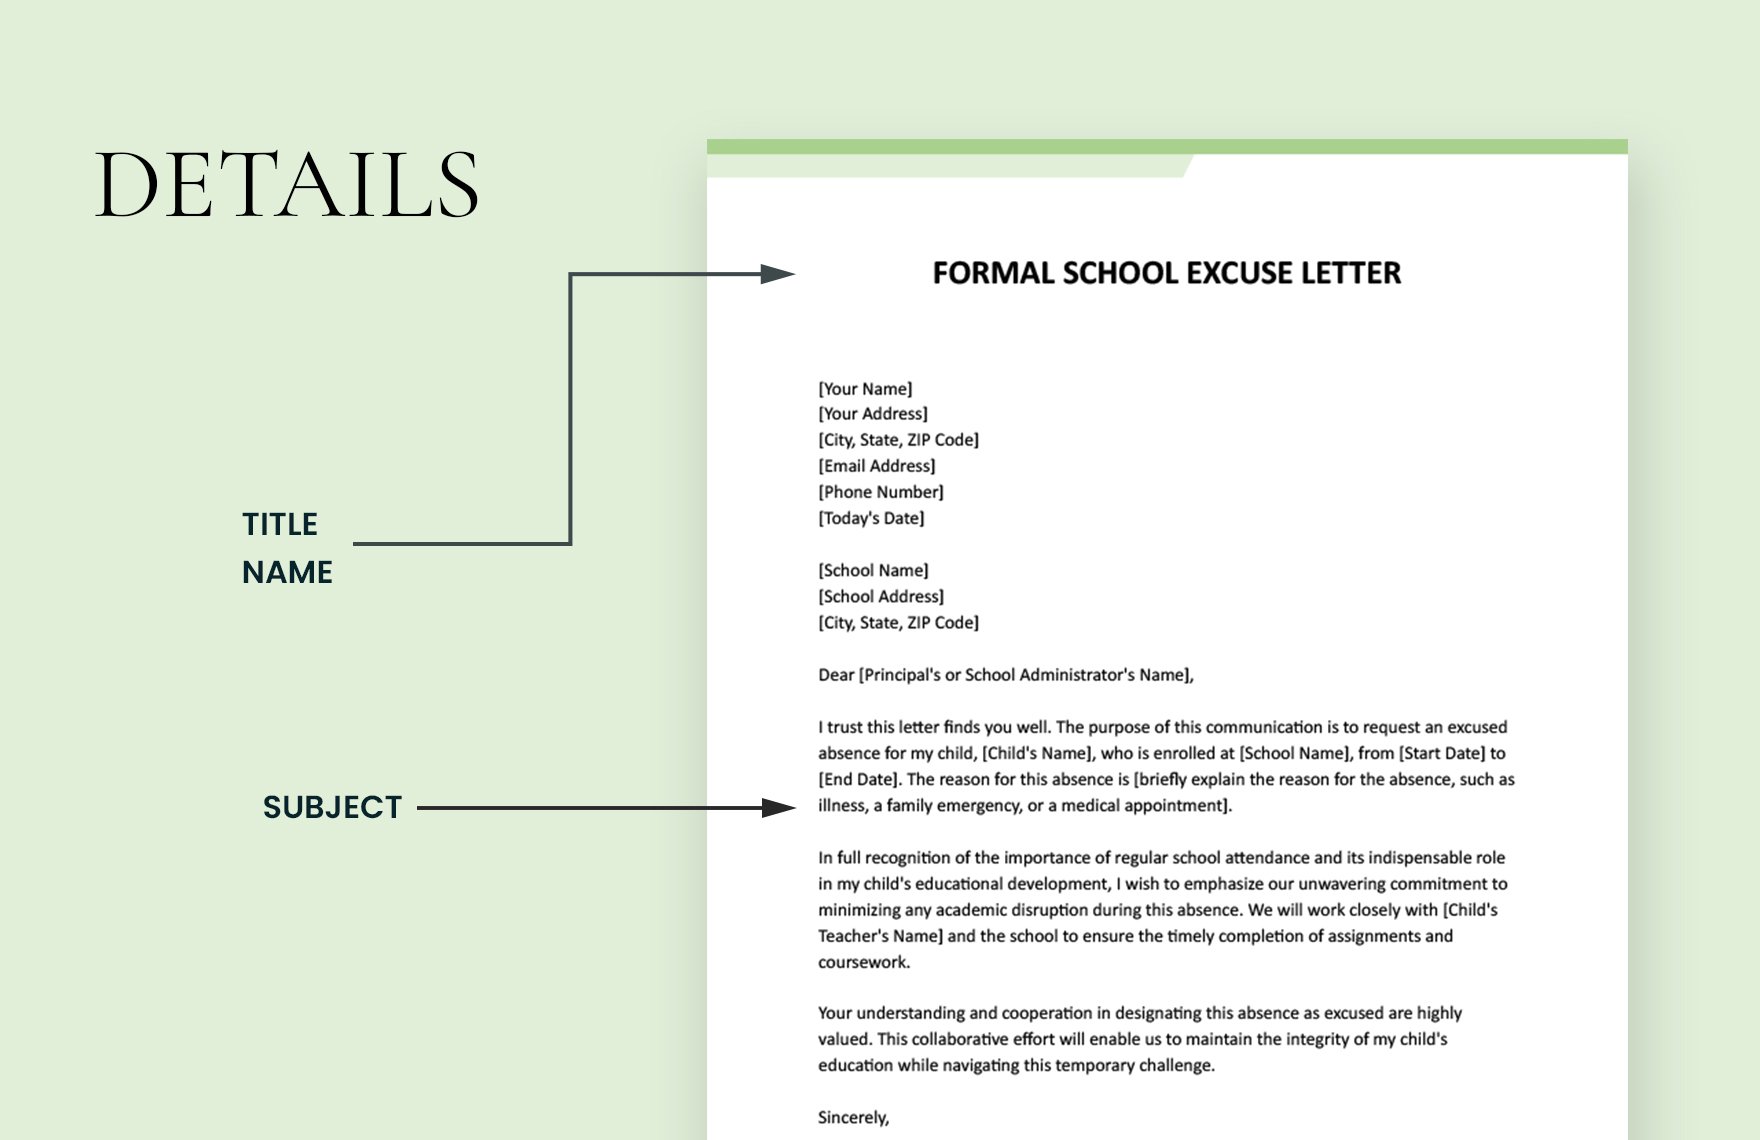 Formal School Excuse Letter